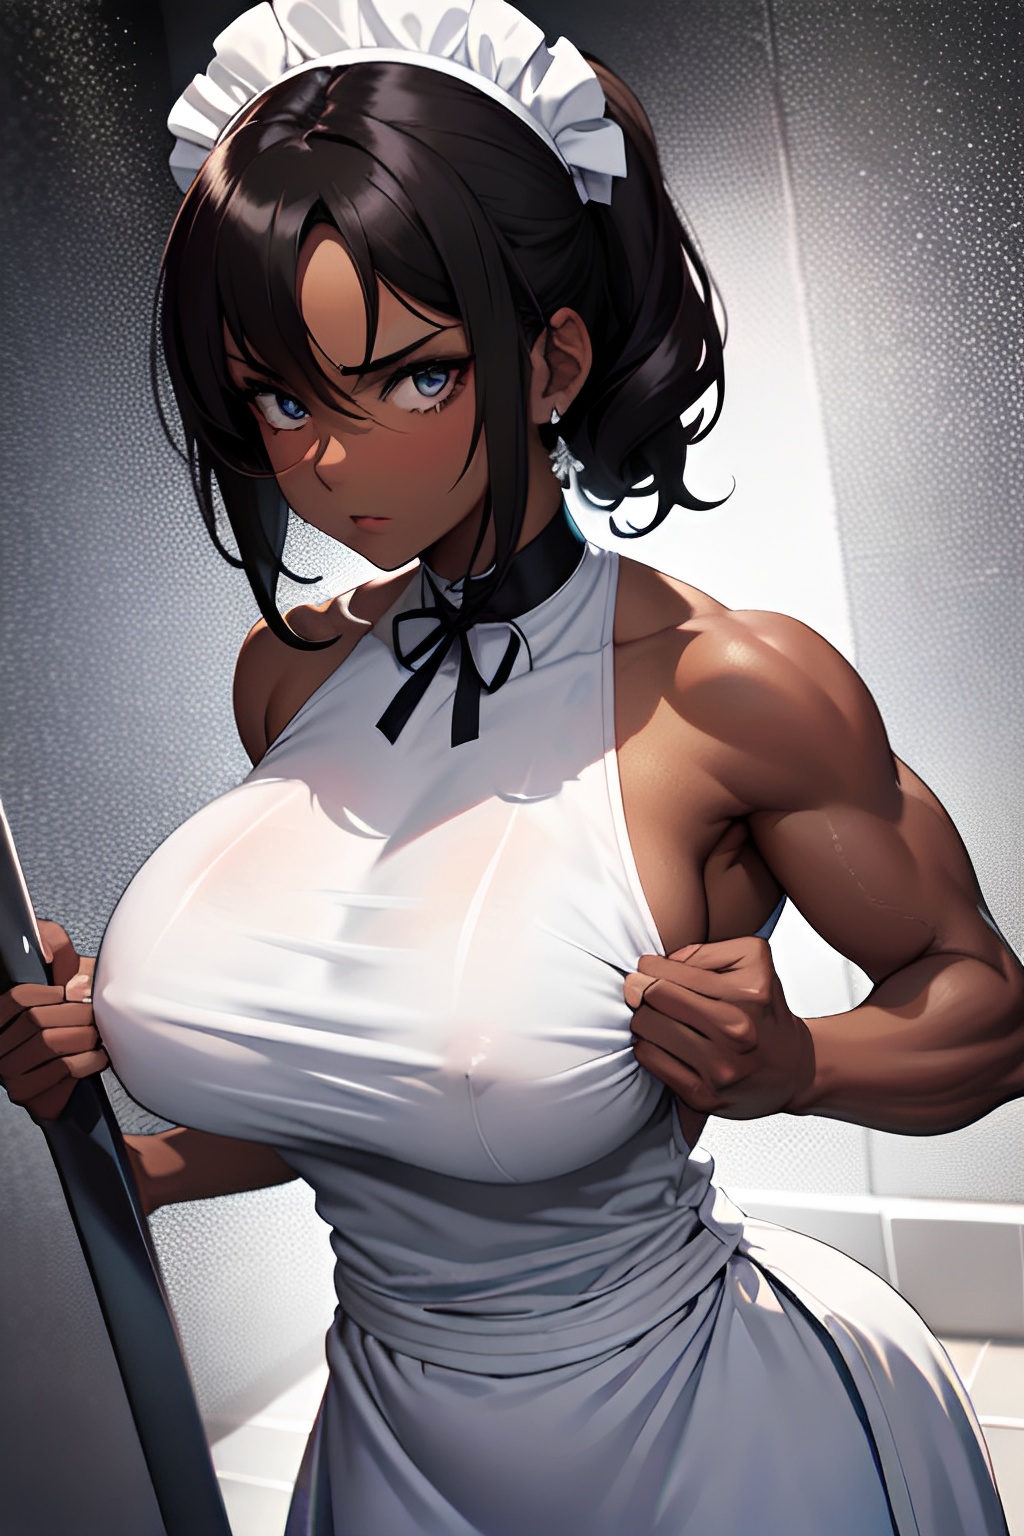 1920s Hardcore Porn Close Up - Anime Muscular Huge Boobs 20s Age Serious Face Brunette Pixie Hair Style  Dark Skin Black And White Shower Close Up View Working Out Maid  3666402697789477797 - AI Hentai